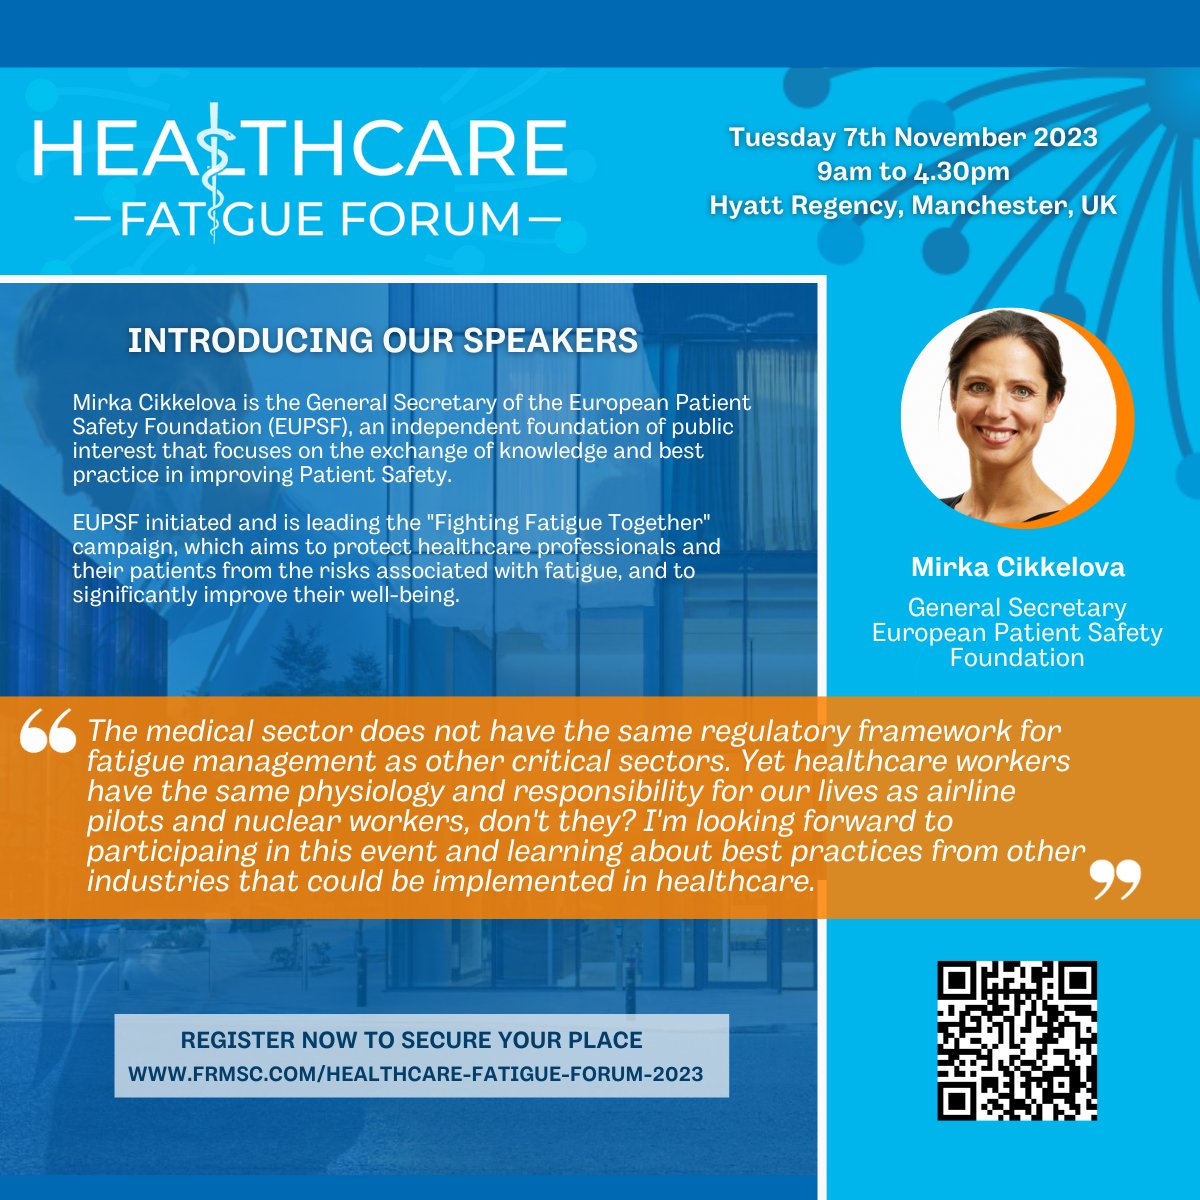 The Healthcare Fatigue Forum is delighted to welcome @MirkaCikkelova 

Mirka will discuss the work the EUPSF have been doing on their #fightfatigue campaign and the work across Member States.

#nhsstaff #healthcarefatigueforum